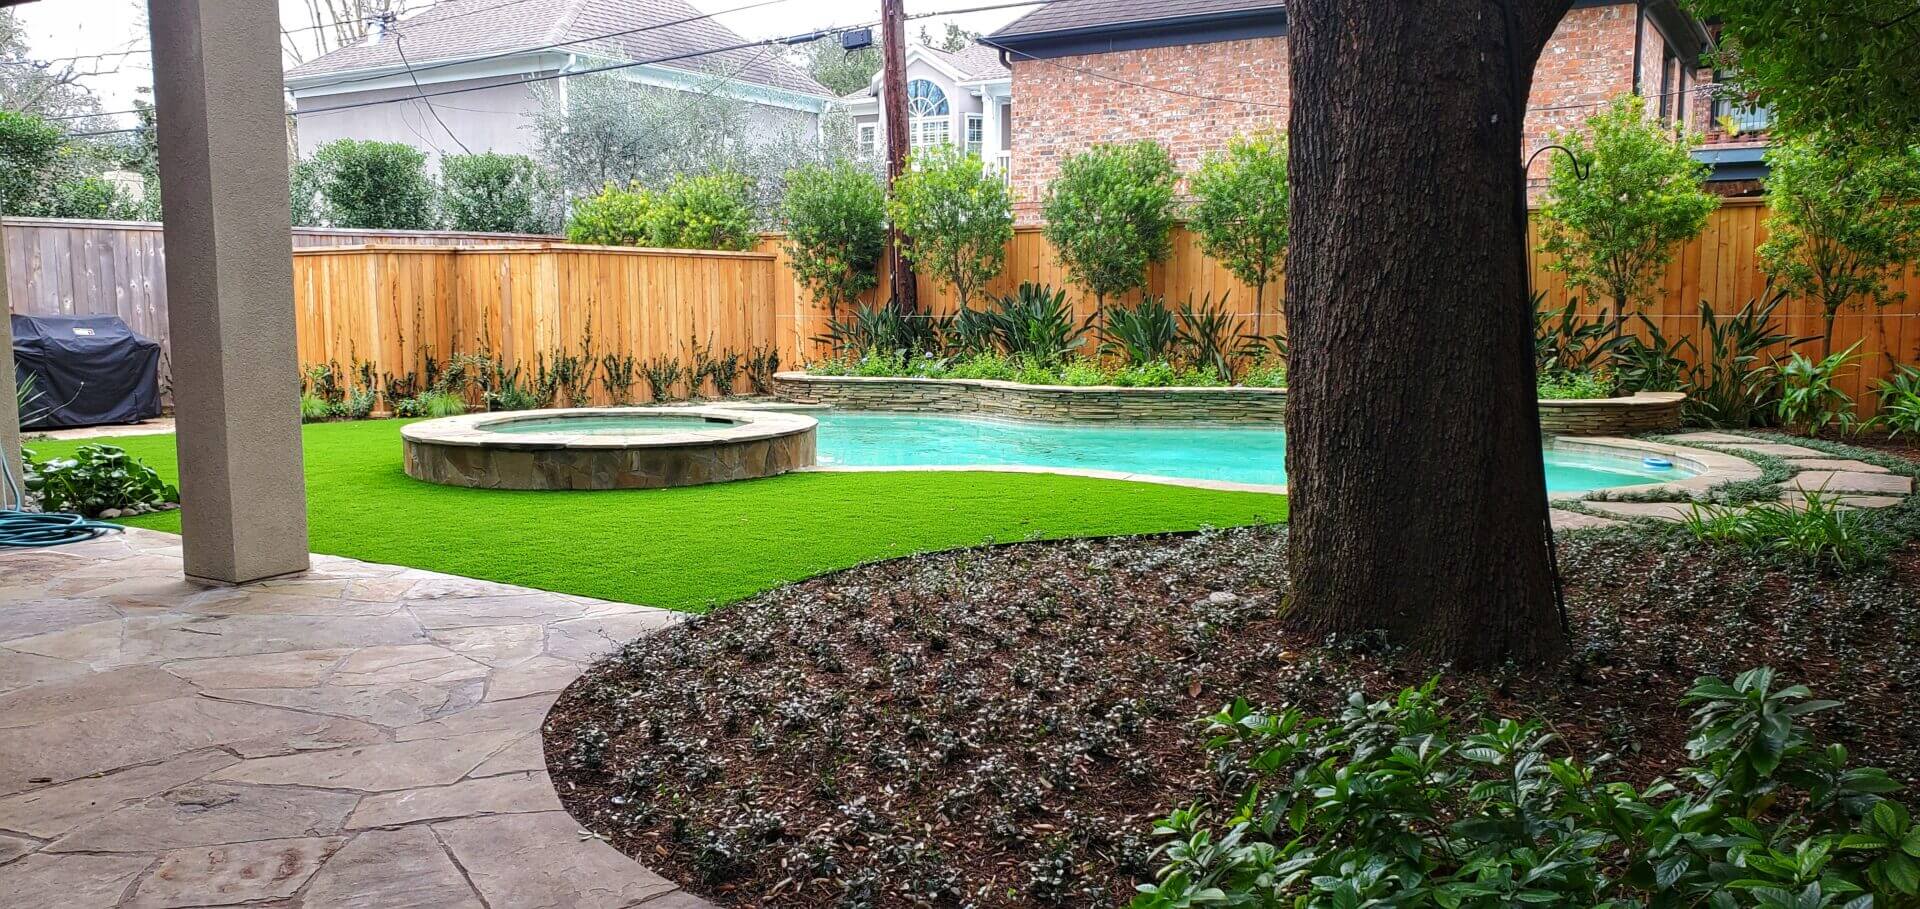 A pool in a backyard with a tree